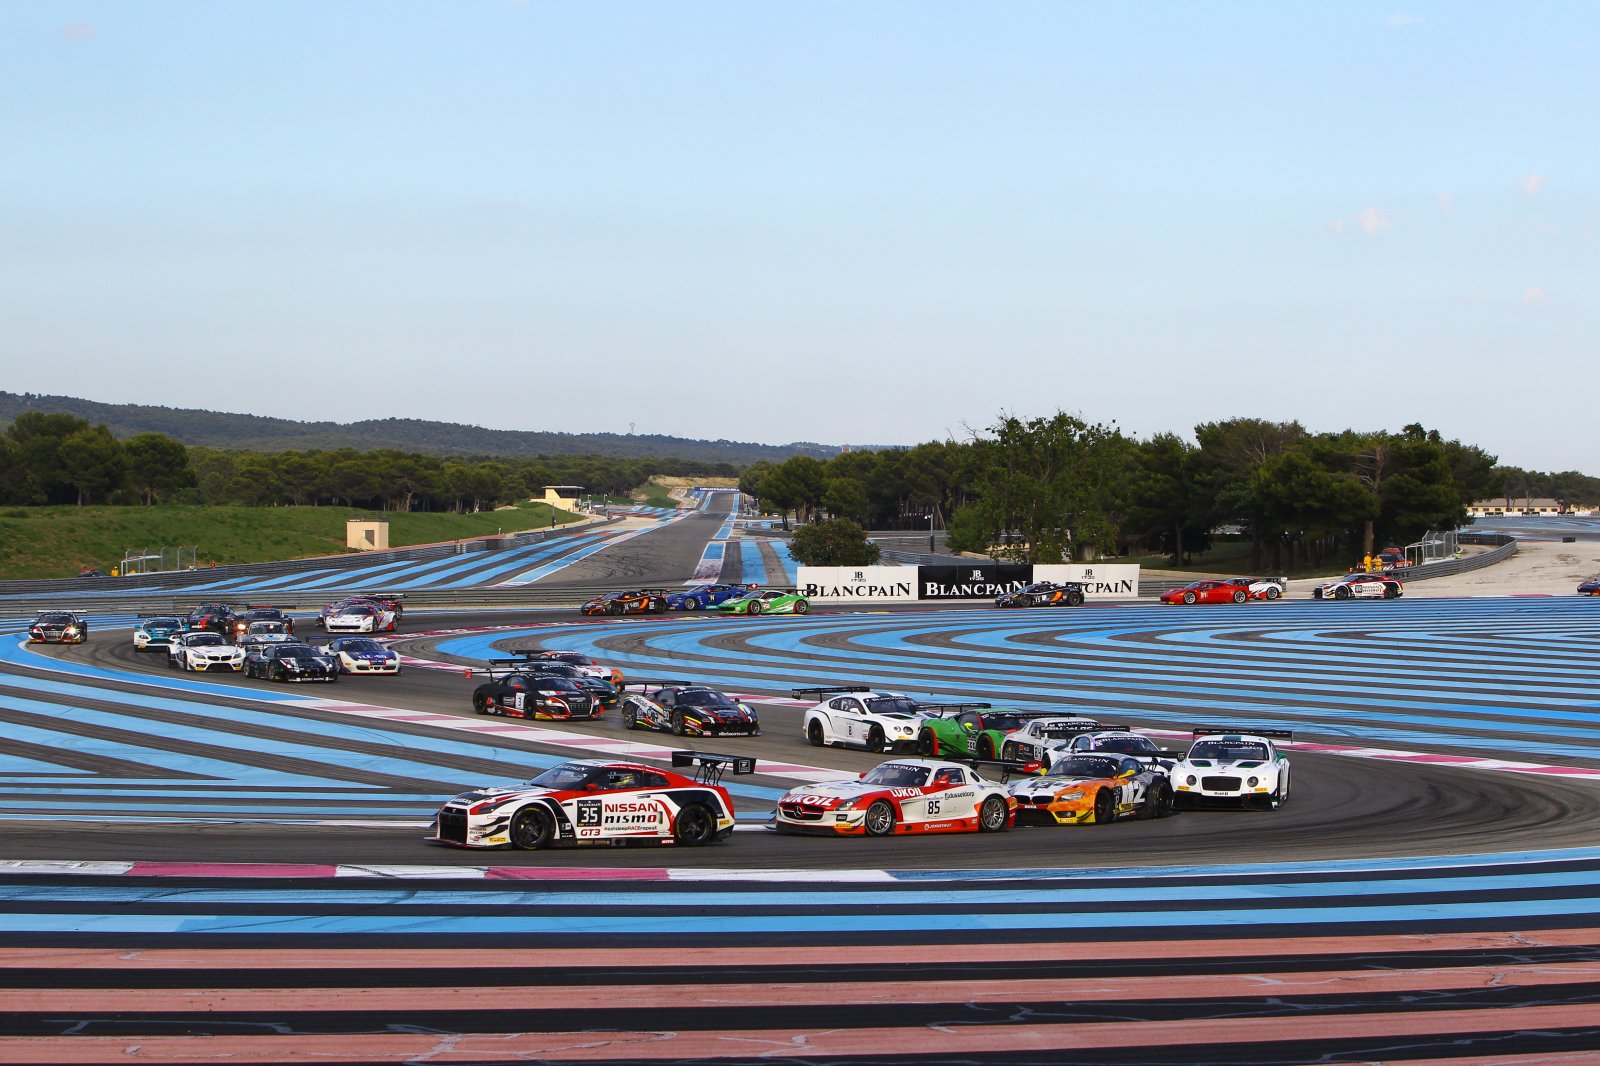 2015 Blancpain GT Series most competitive yet